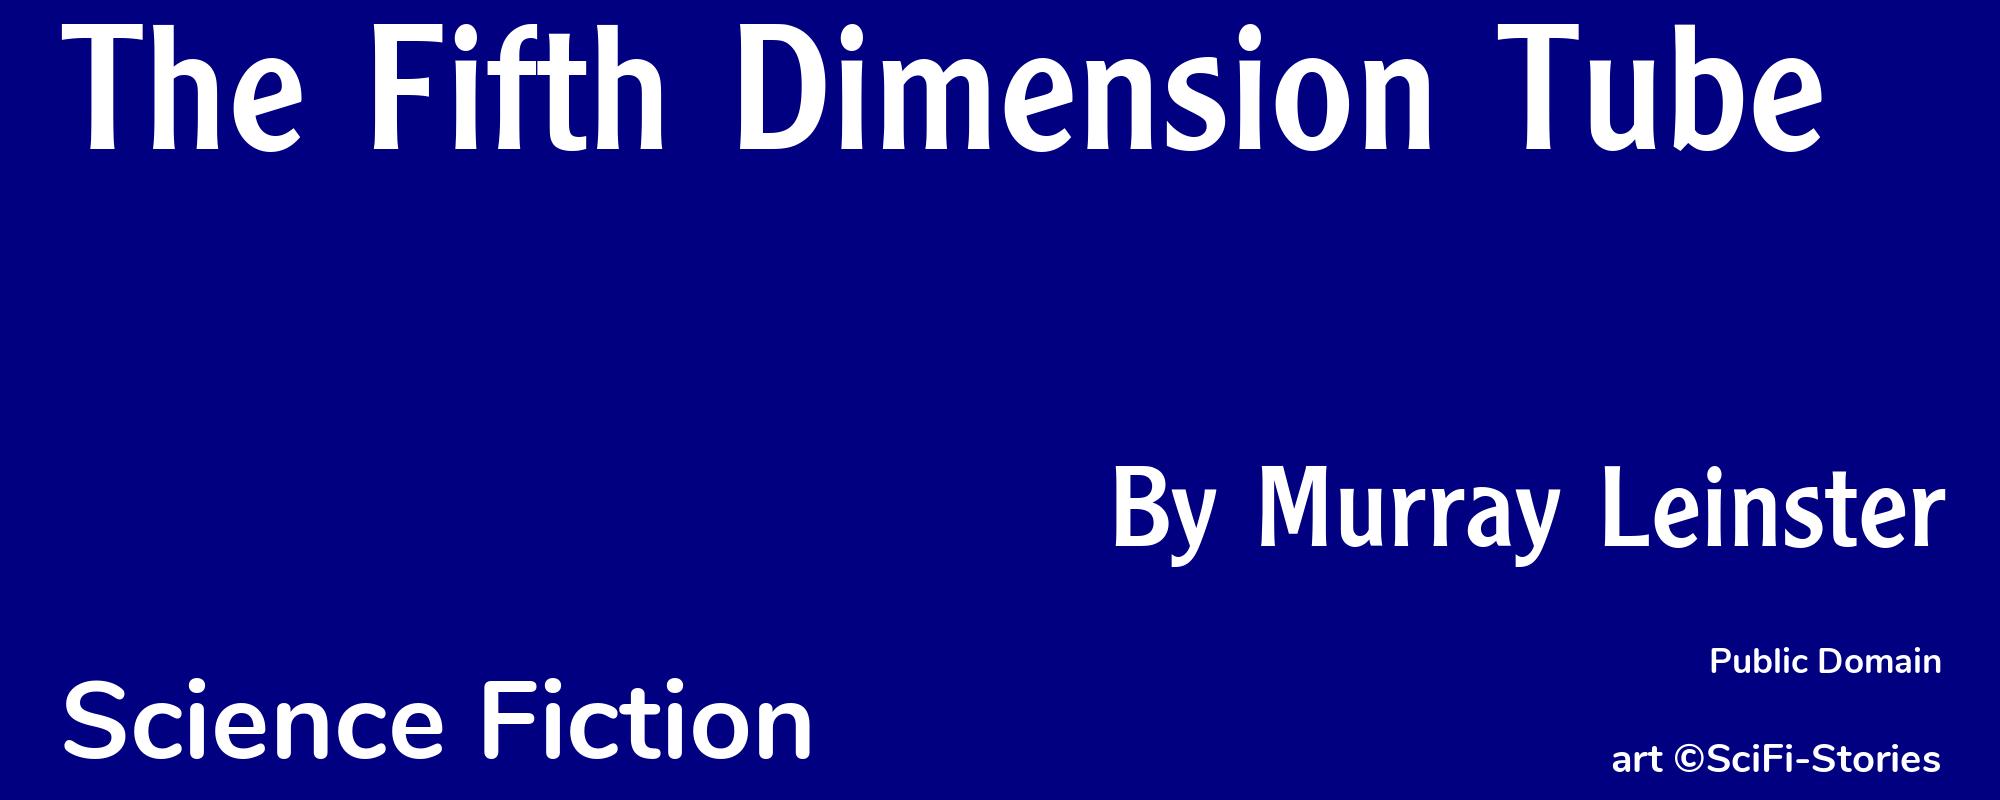 The Fifth Dimension Tube - Cover